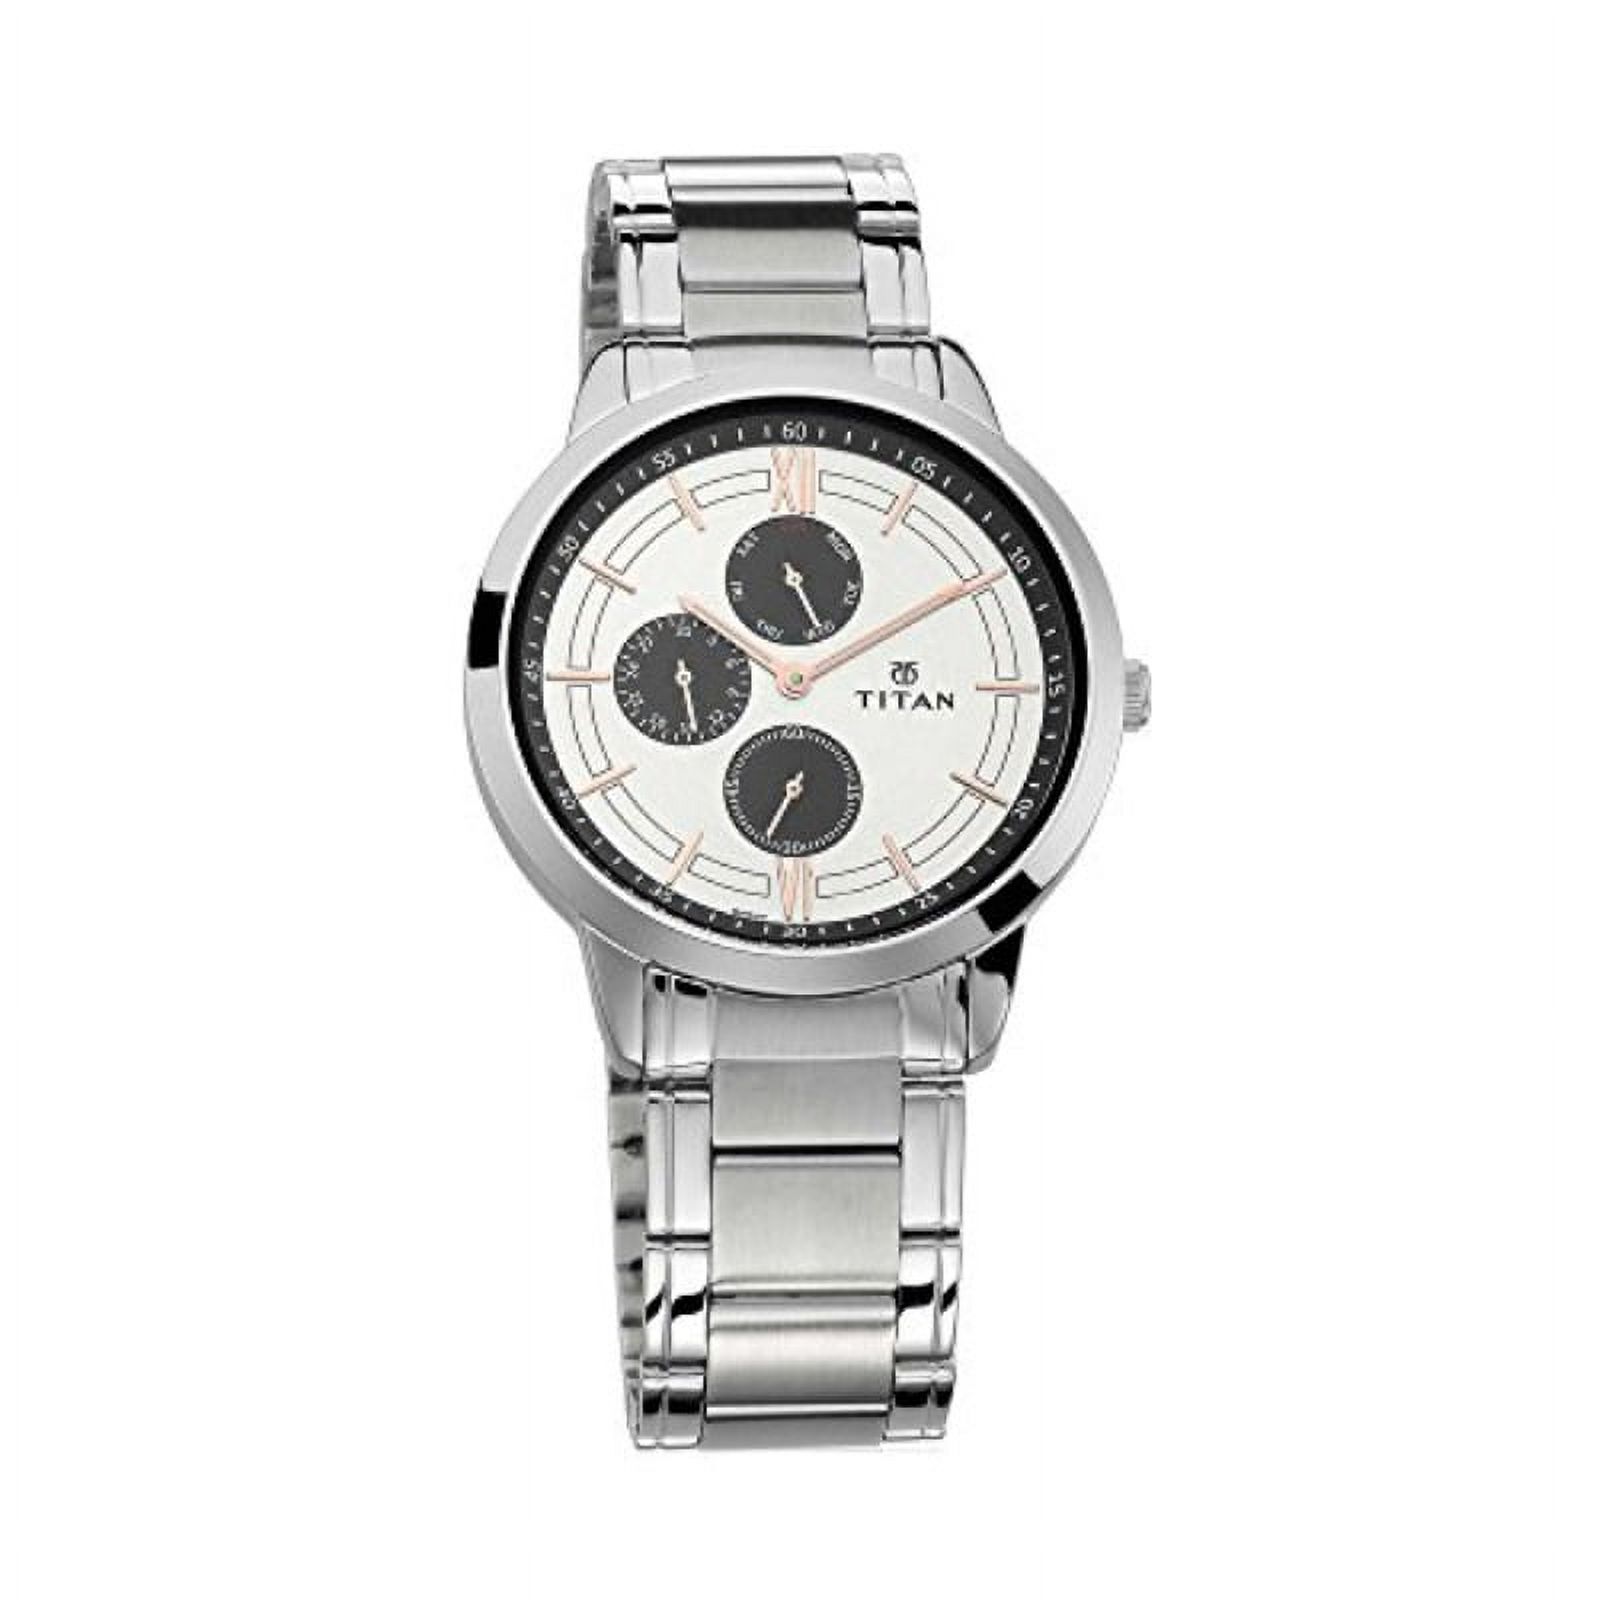 Titan Workwear Men?s Chronograph Watch - Quartz, Water Resistant, Stainless Steel Strap - Silver Band and Silver Dial - image 1 of 1